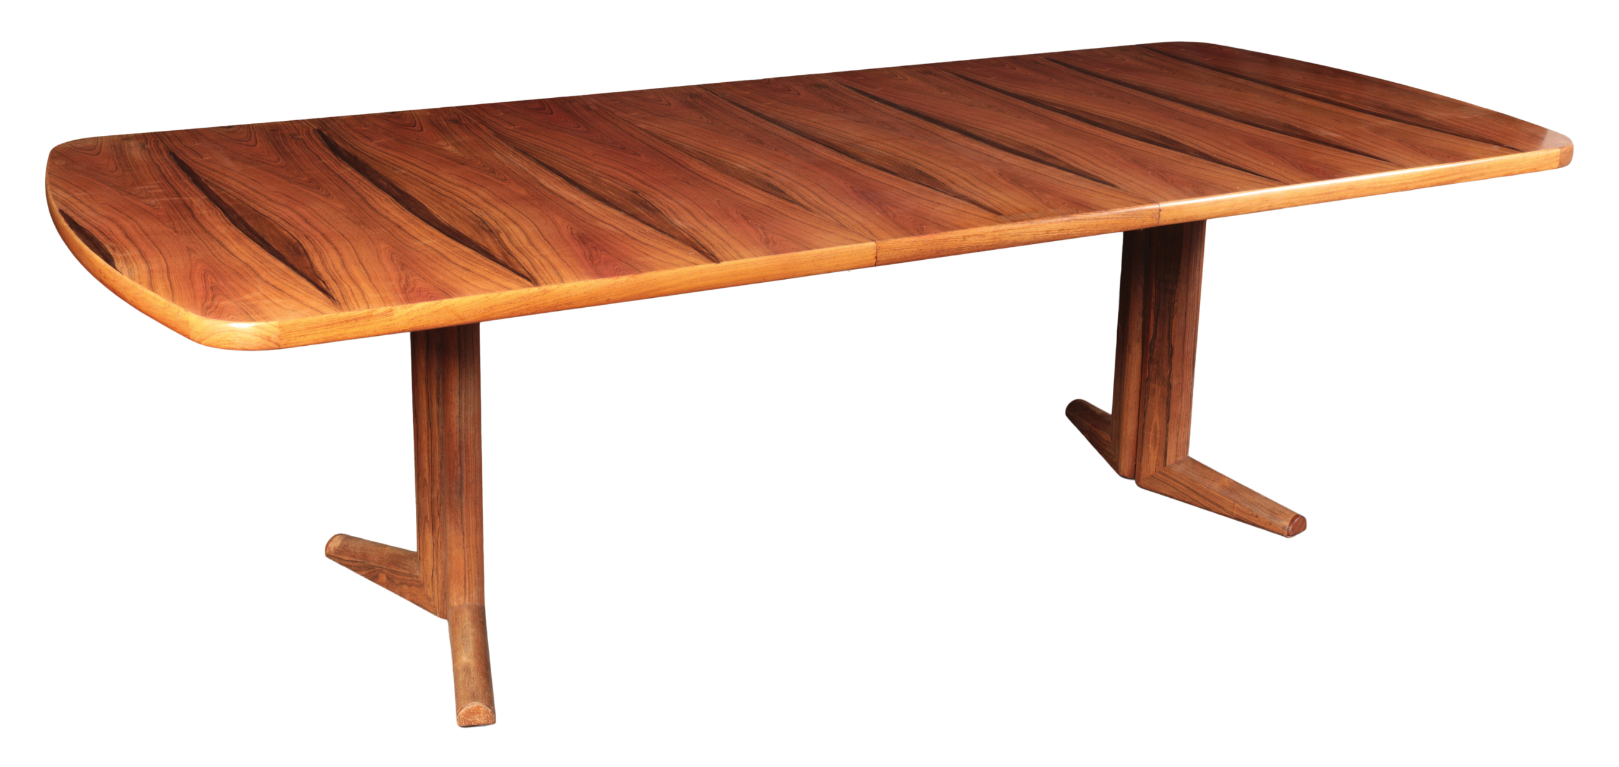 MARTIN HALL FOR GORDON RUSSELL: A ROSEWOOD 'MARLOW' EXTENDING DINING TABLE - Image 3 of 3